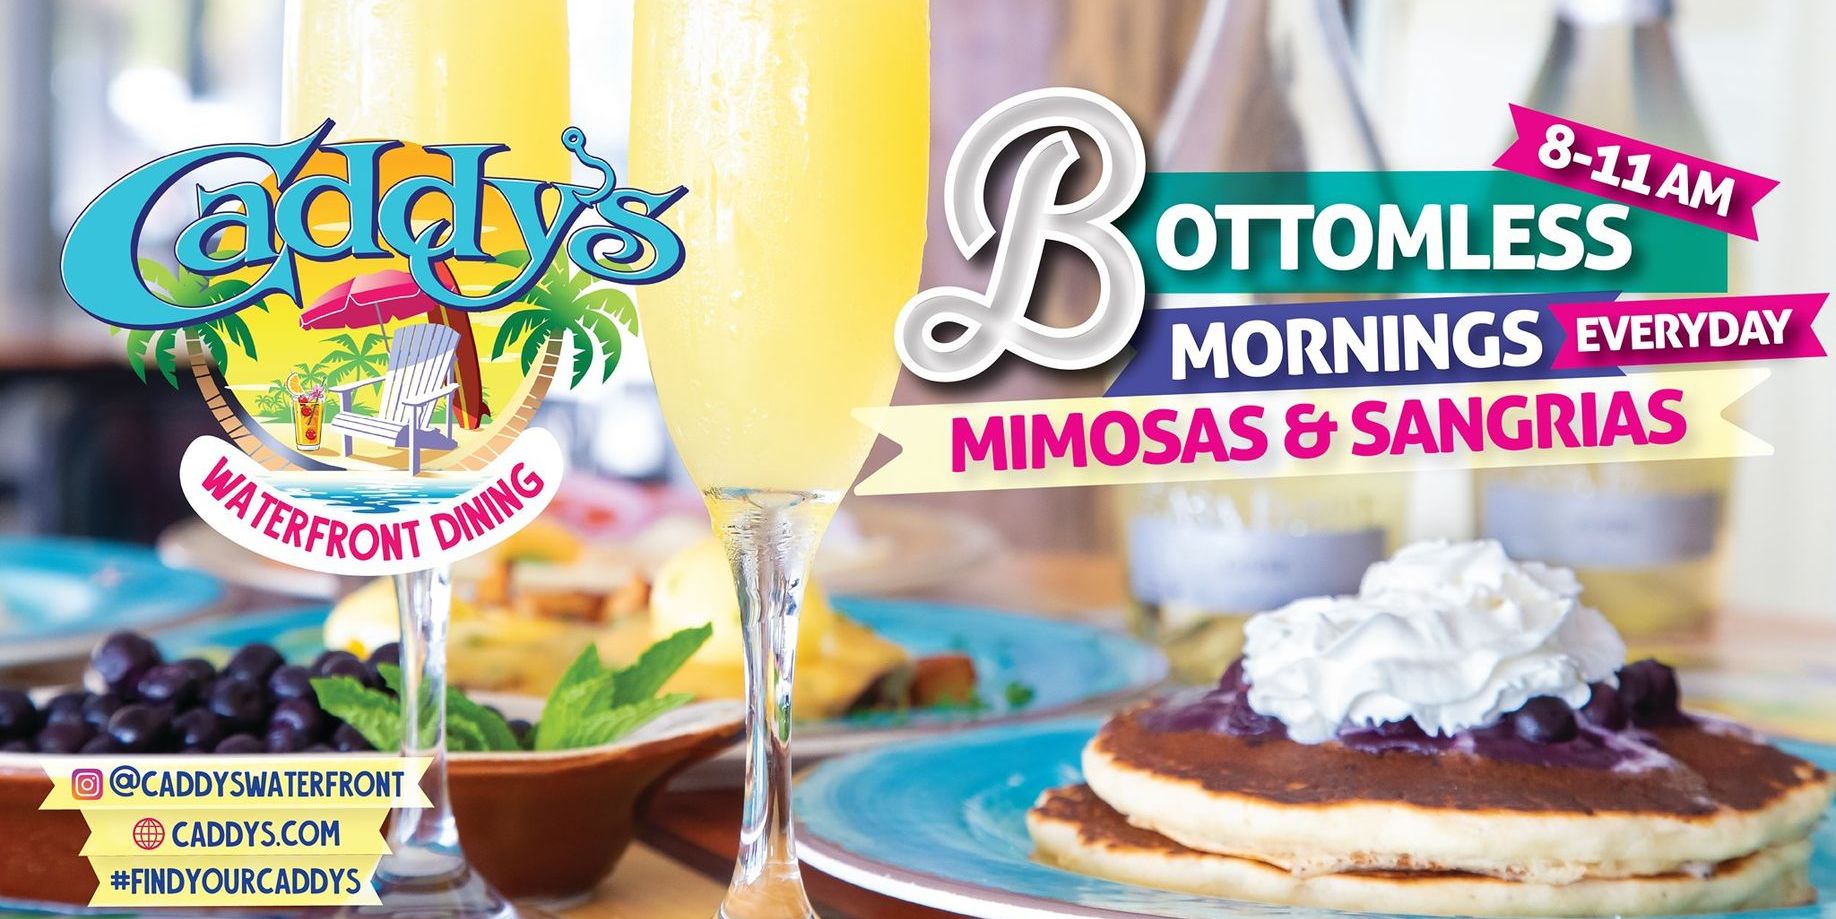 Bottomless Mornings! promotional image